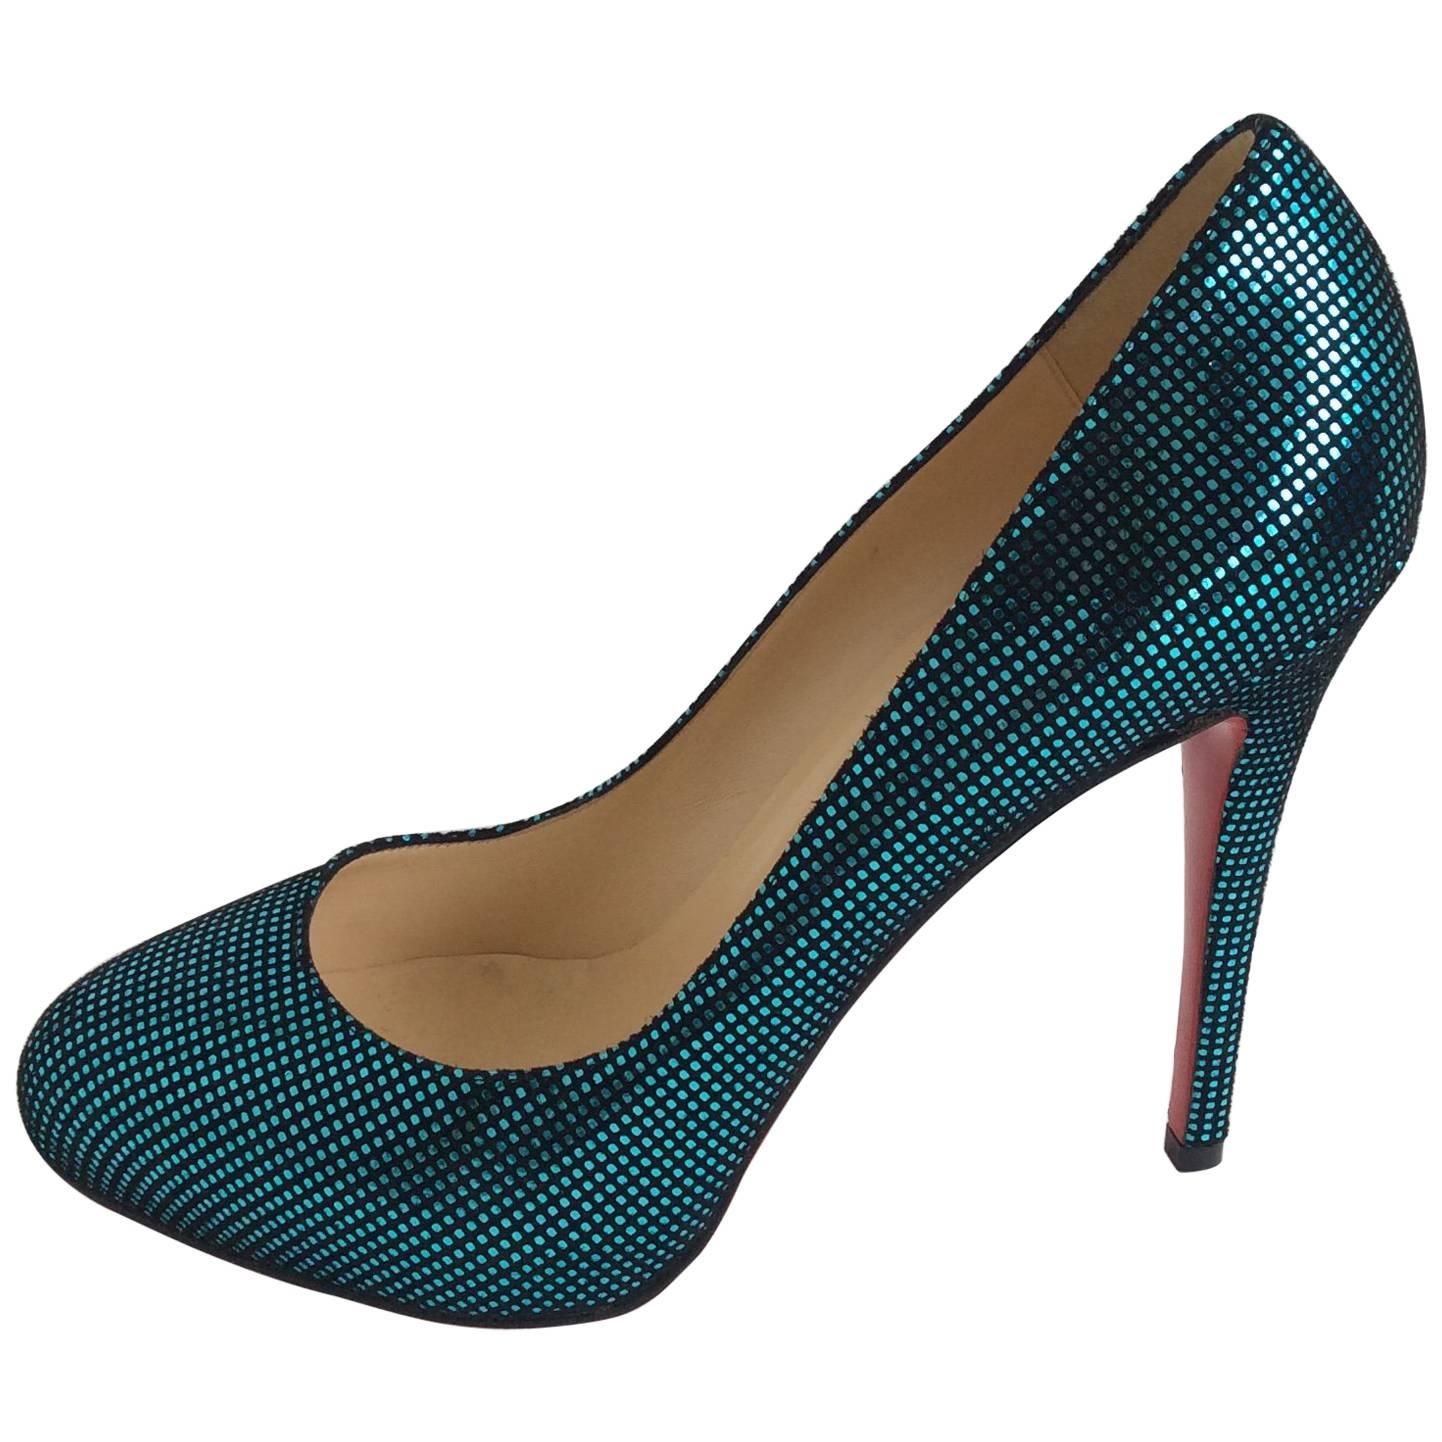 Christian Louboutin Metallic Green Imprinted Suede Round-Toe Pump Sz 40.5/Us10.5 For Sale